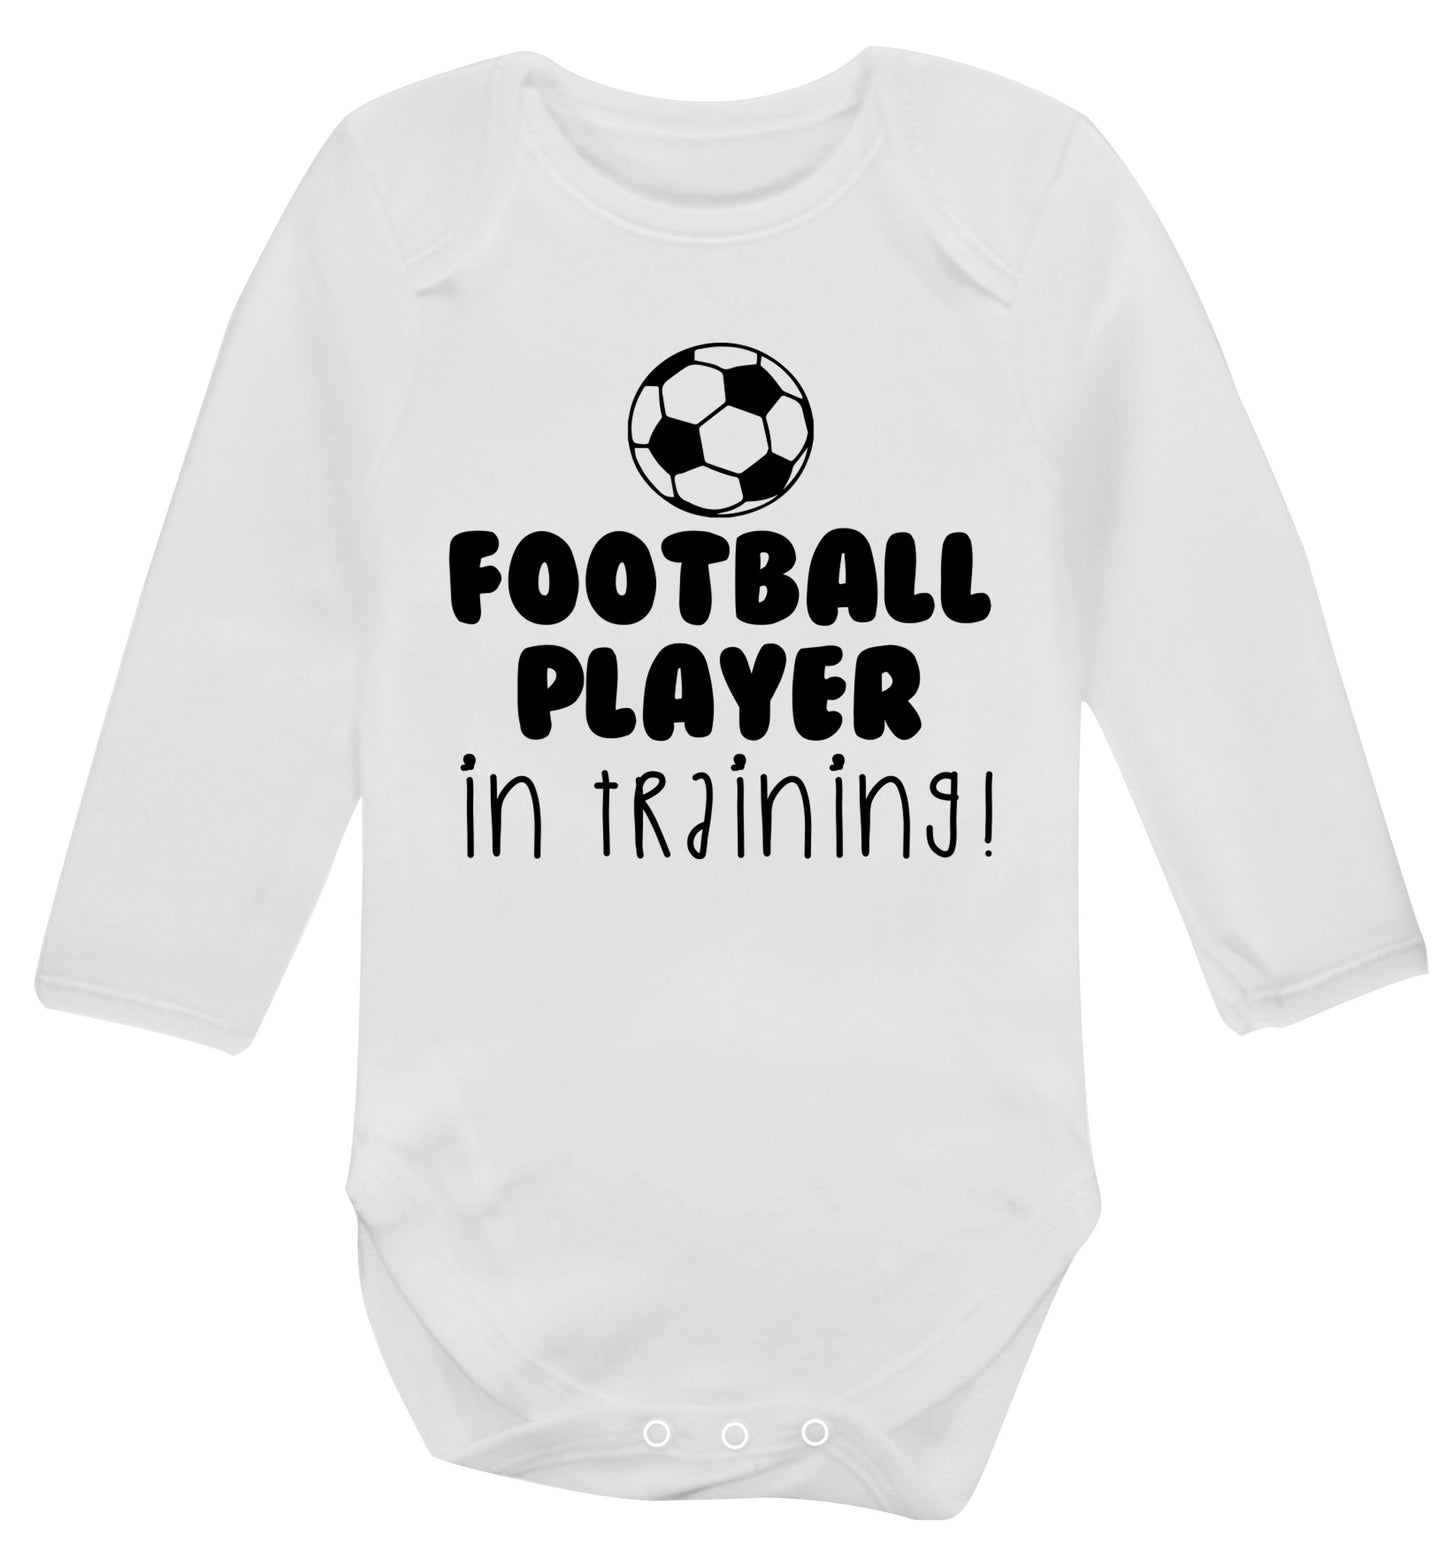 Football player in training Baby Vest long sleeved white 6-12 months